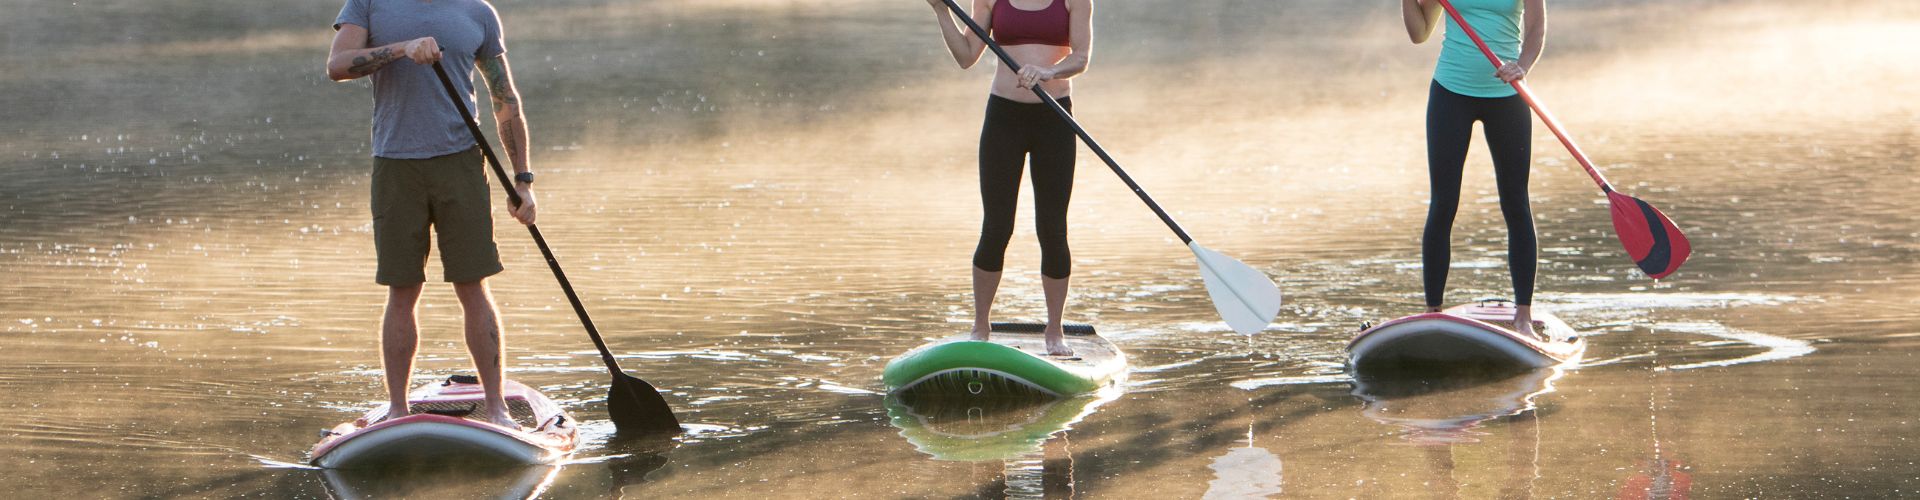 best inflatable sup under $500